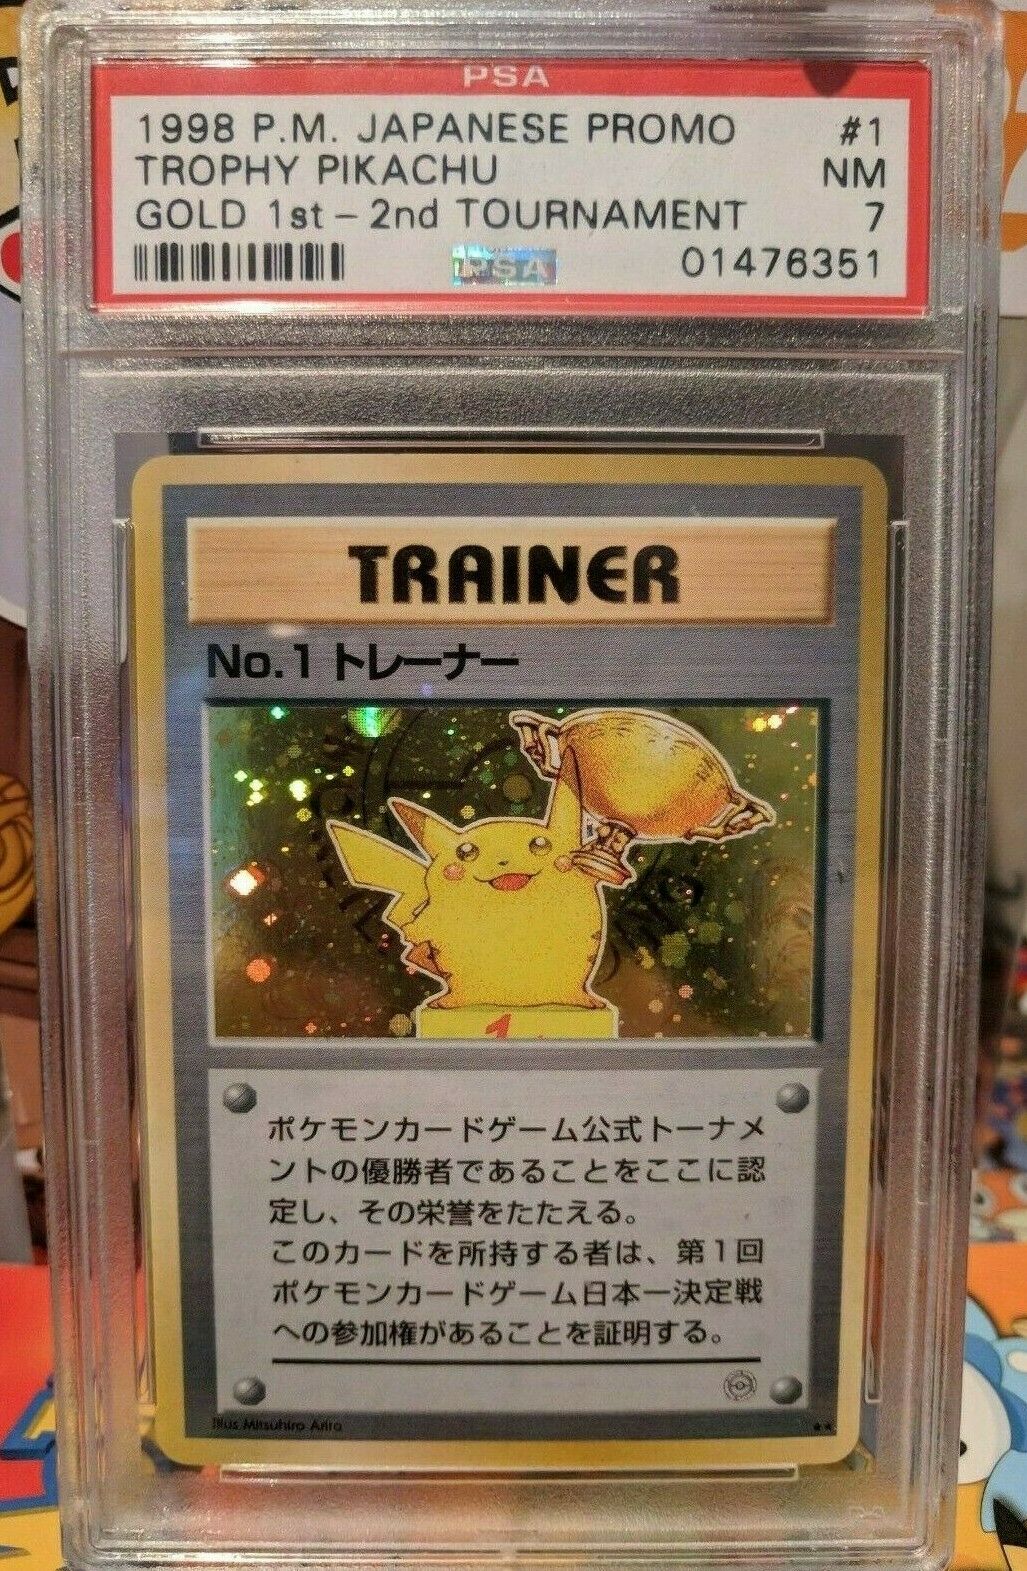 The Most Expensive Pokemon Card